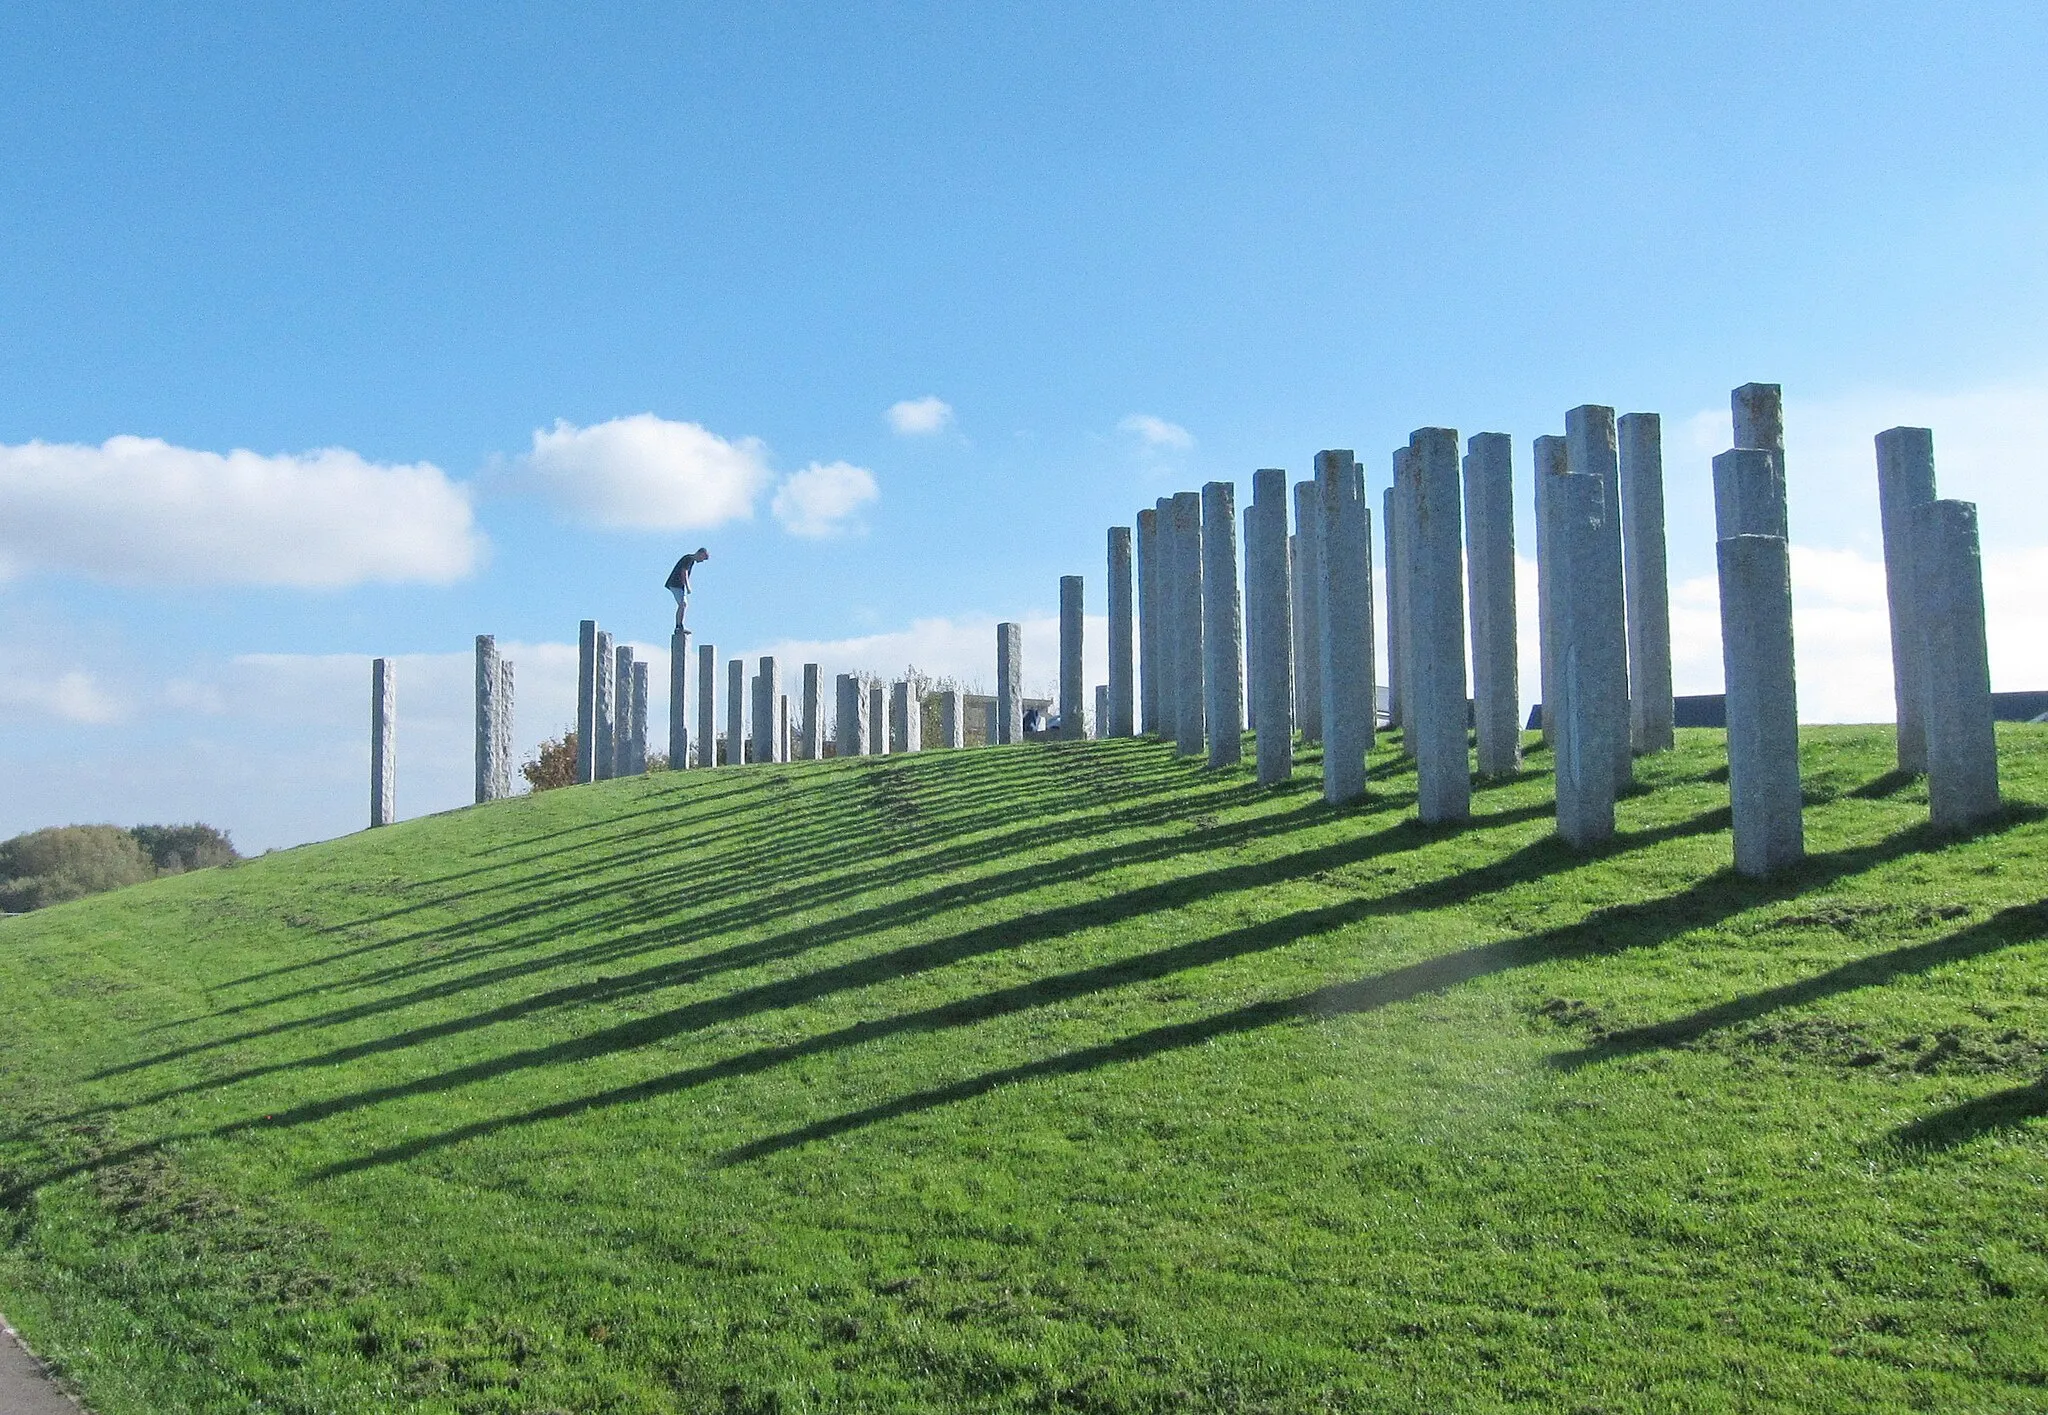 Photo showing: Full Fathom Five sculpture by Michael Dan Archer, at Port Marine, Portishead, near Bristol, Somerset, England. There are 108 granite columns varying in height from 1 to 3 metres arranged across an earth mound, giving views of the Bristol Channel and the coast of Wales.
The pillars were made in a quarry in Xiamen in China and transported by ship to the UK.

The youth is attempting to jump from top to top.